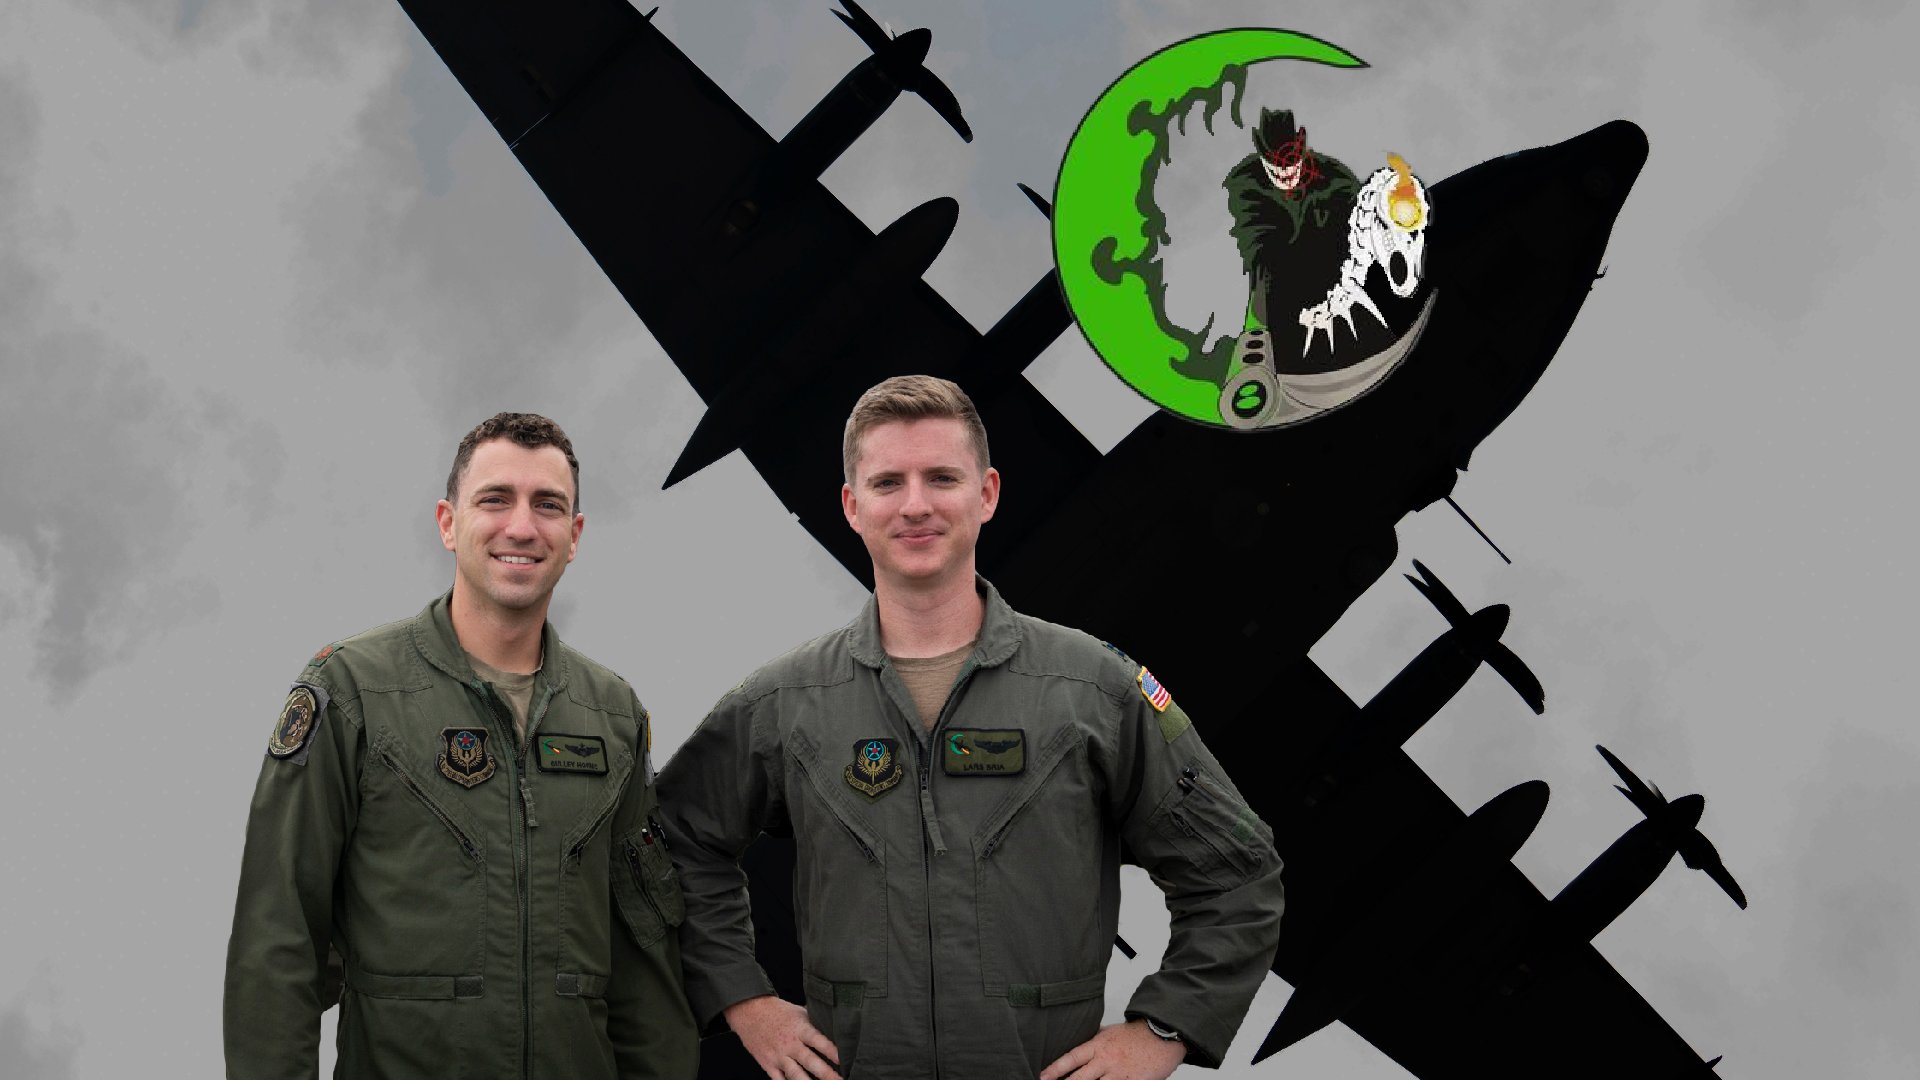 Two AC-130 crews, led by pilots Culley zzzz, flew for a combined 30 hours over Kabul on August 15, 2021, providing overwatch to the evacuation of the US embassy and the early chaotic hours of the Kabul airlift. Air Force photos.